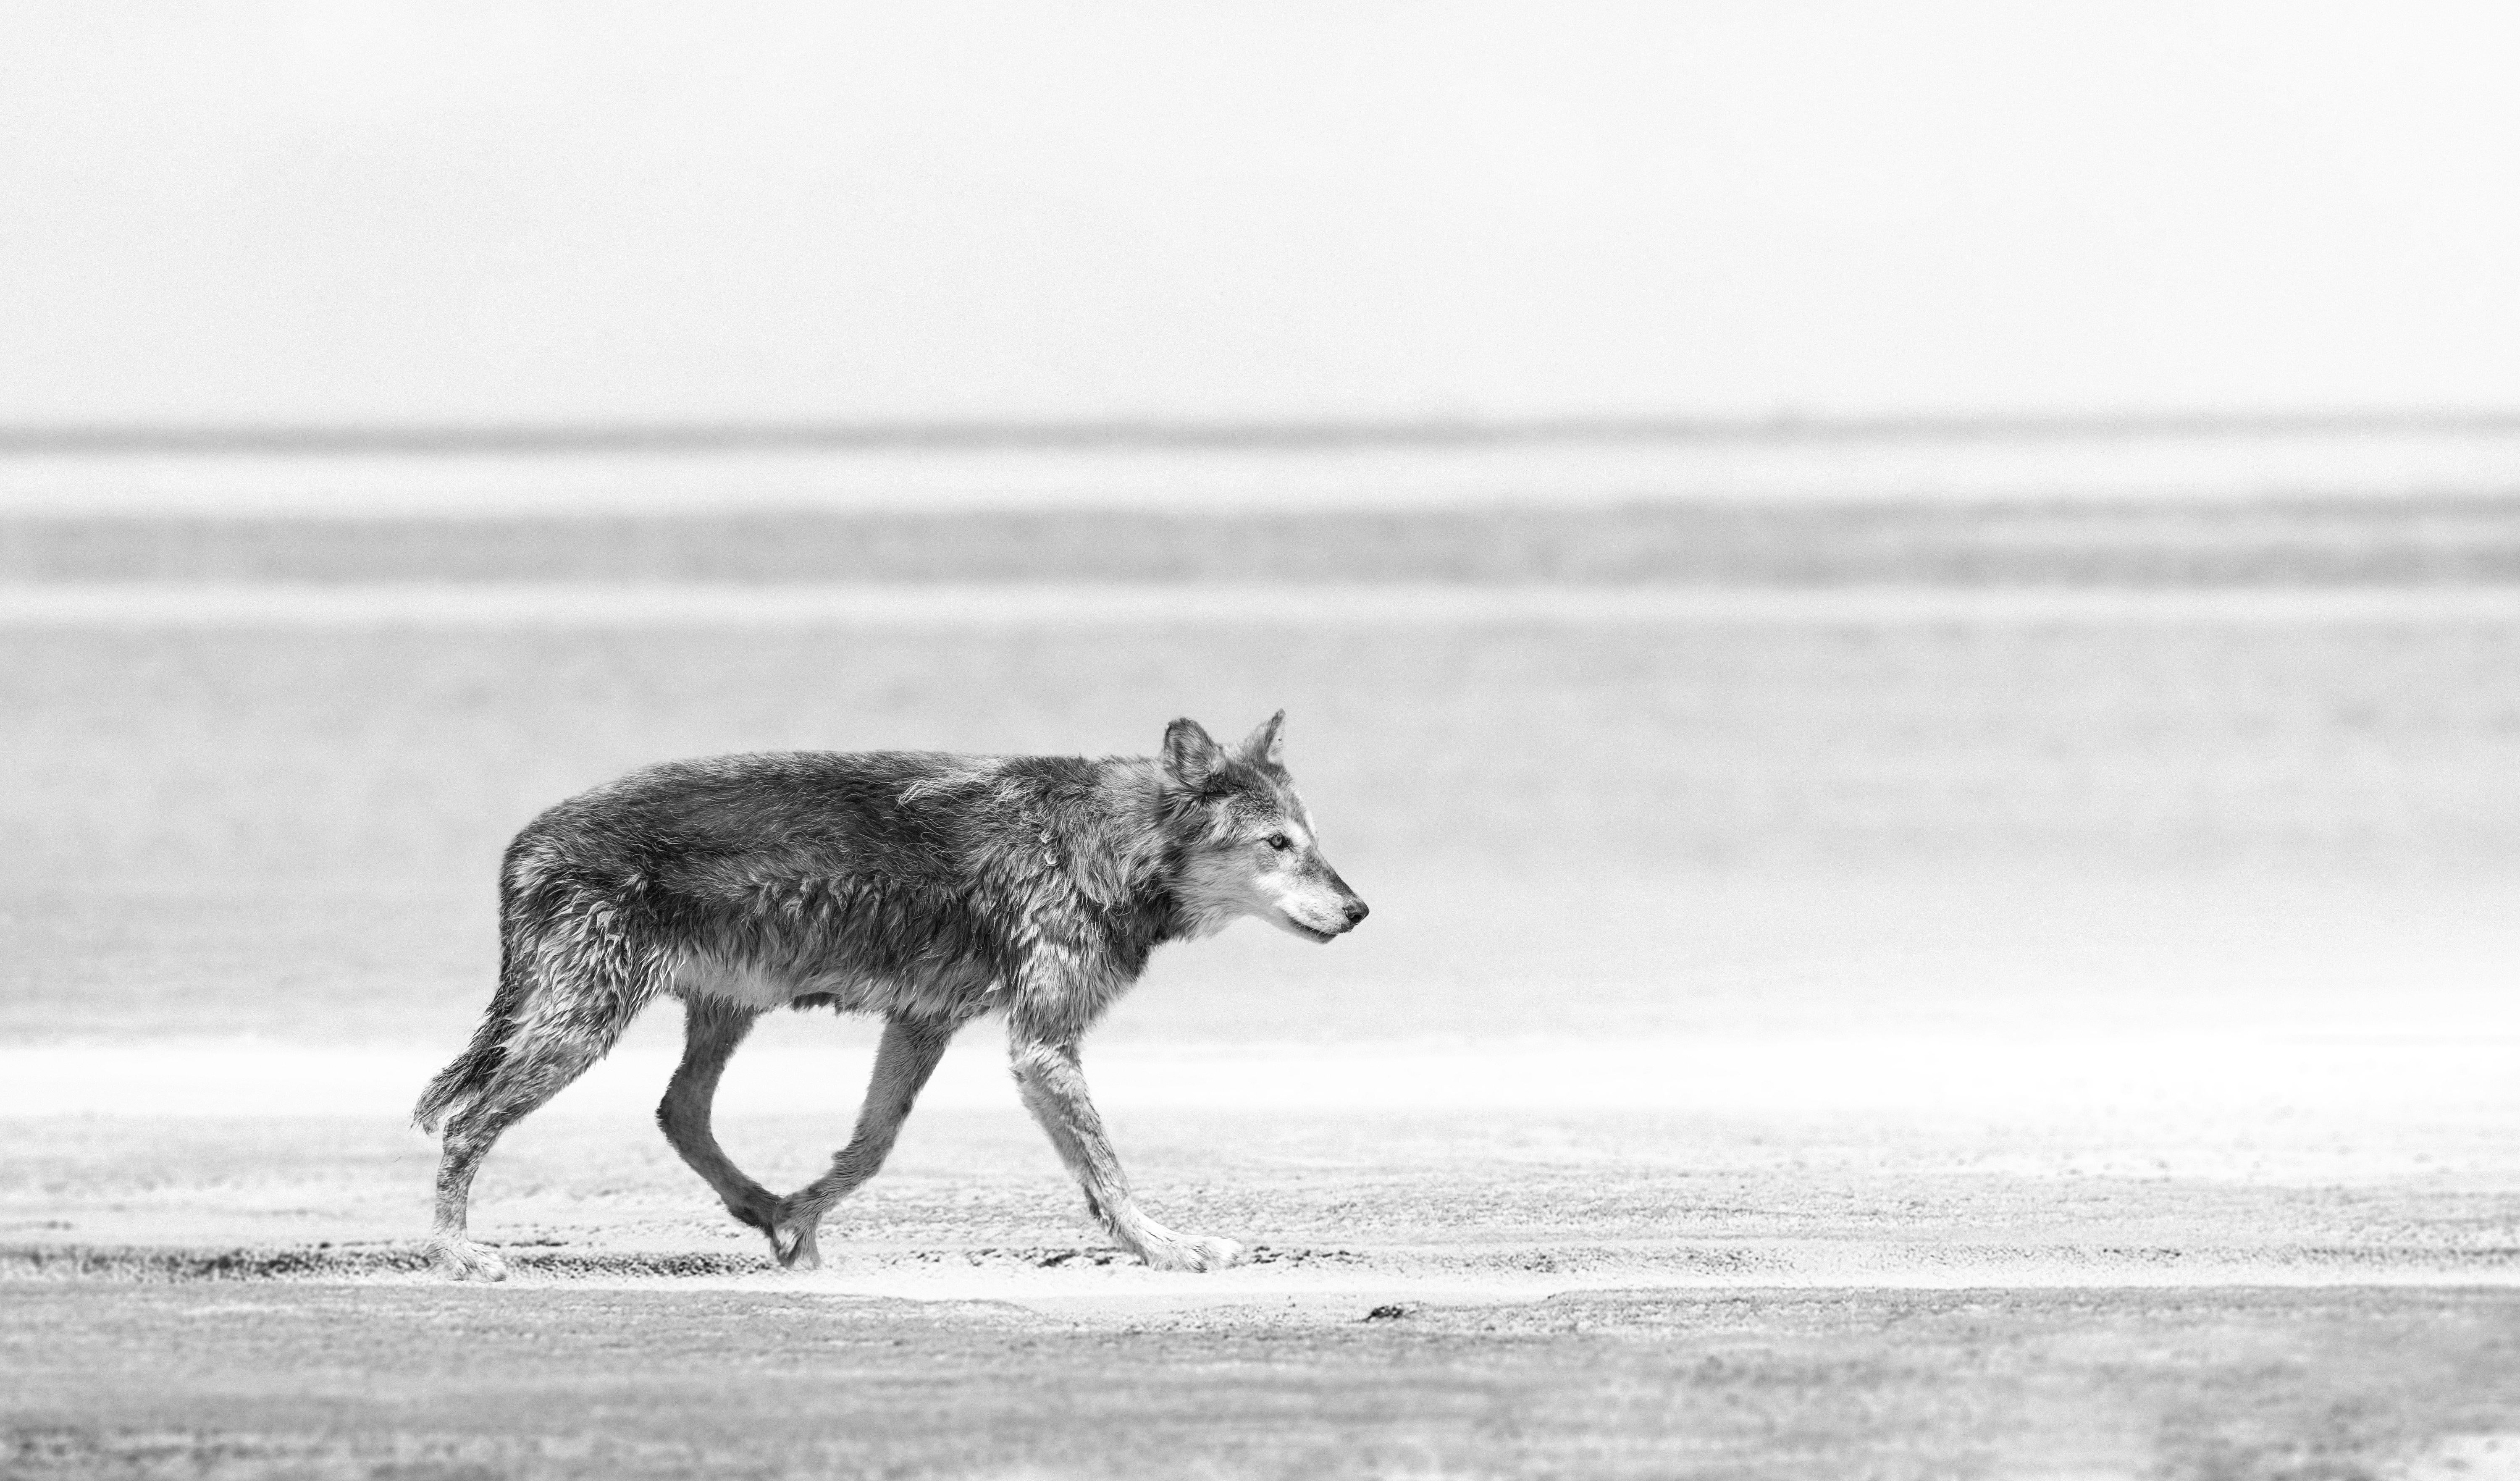 This is a contemporary black and white photograph of a Costal Wolf.
30x60- 1 of 3 unsigned test prints
Printed on Photo Rag using only archival ink. 
Framing available. Inquire for rates. 

 Shane Russeck has built a reputation for capturing